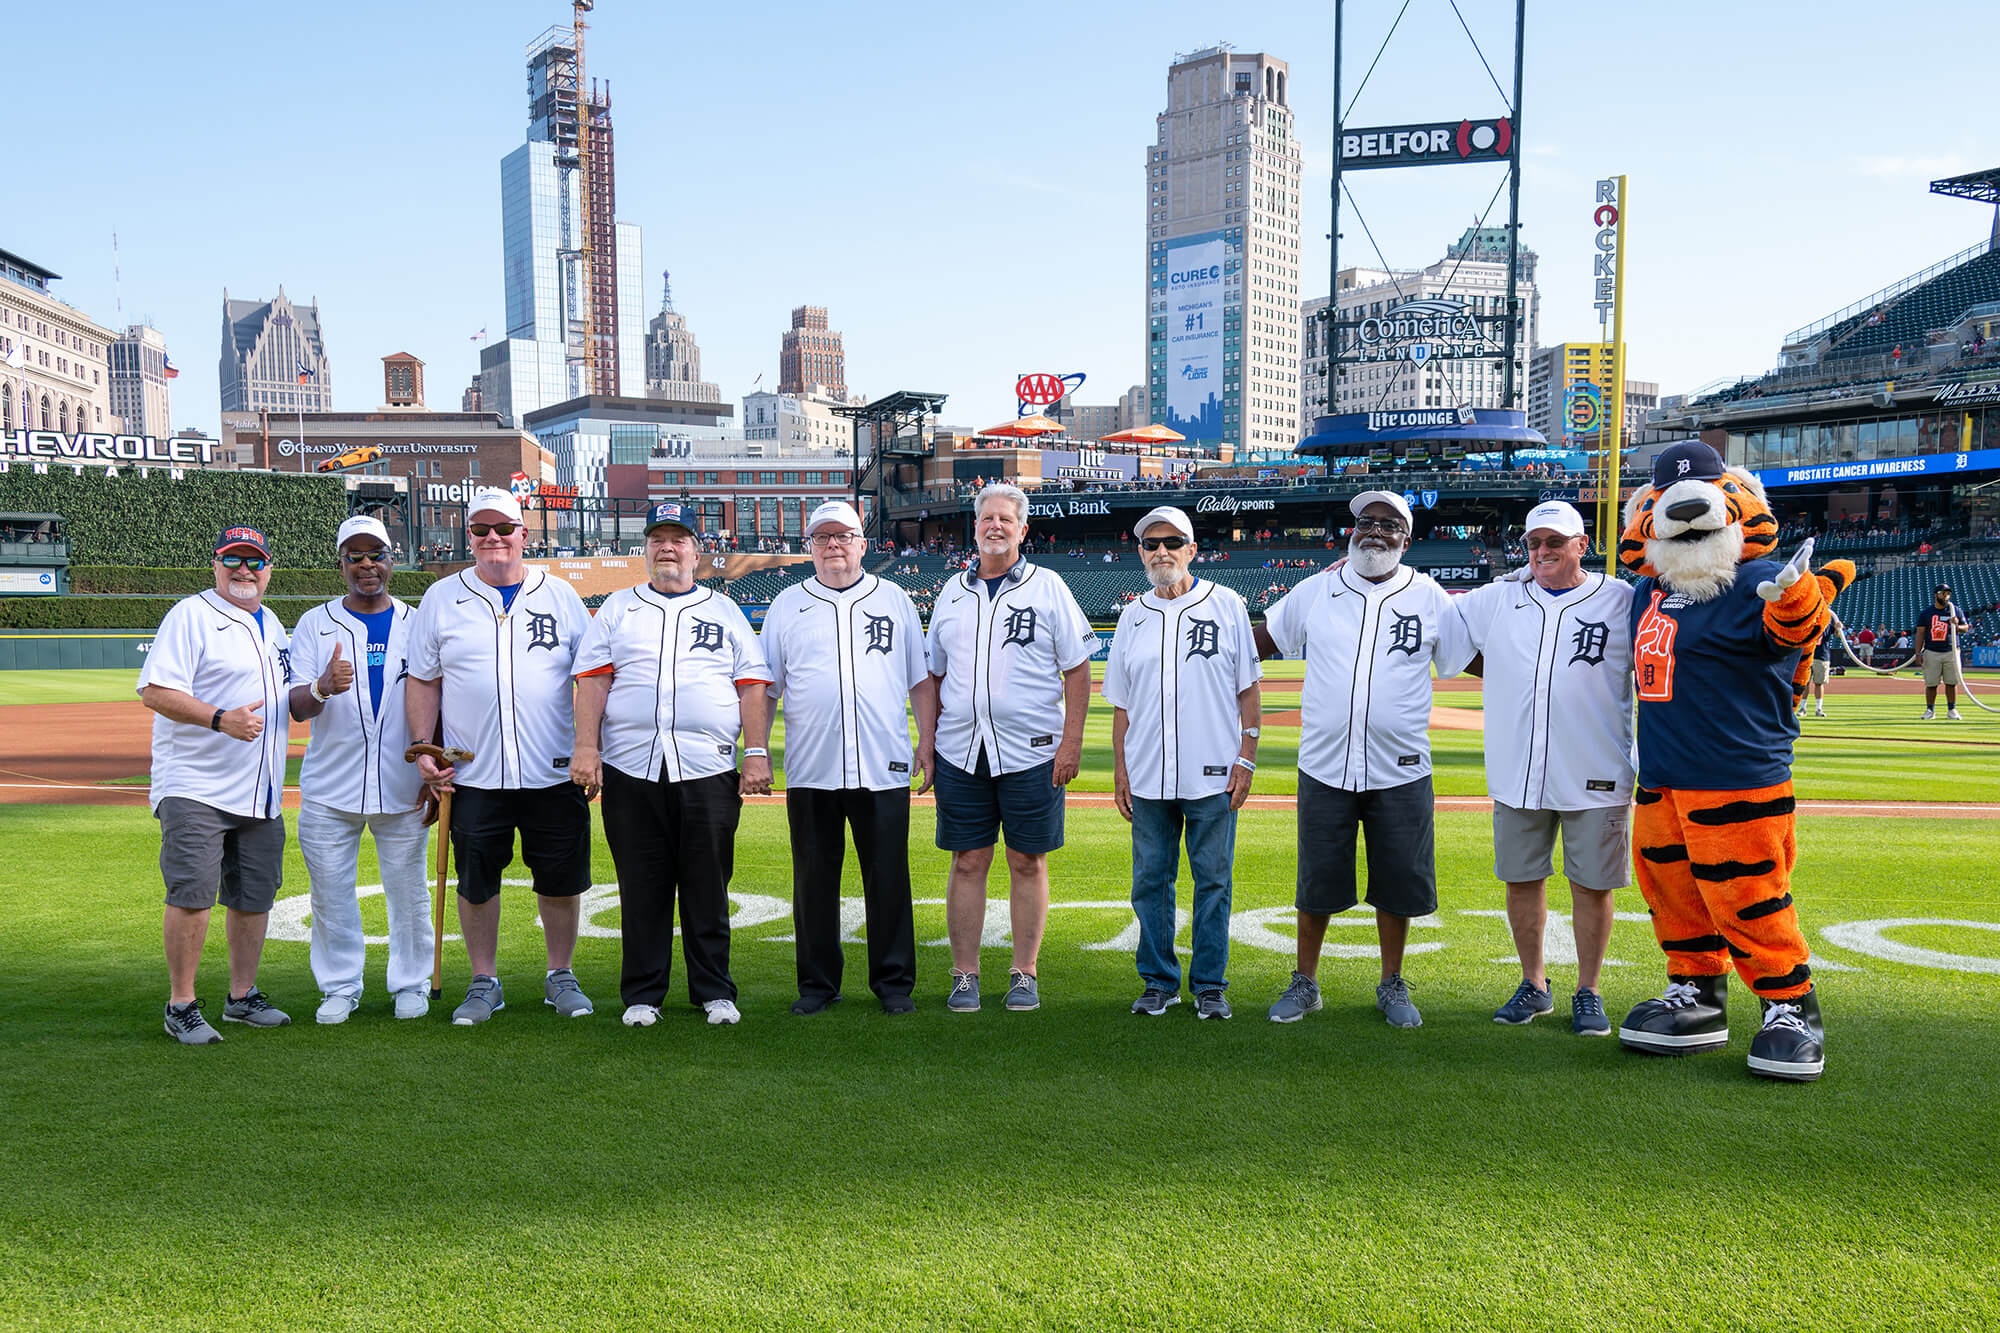 The Karmanos Starting 9 prostate cancer survivors on the field at Comerica Park ahead of the fourth annual Prostate Cancer Awareness Night with the Detroit Tigers.